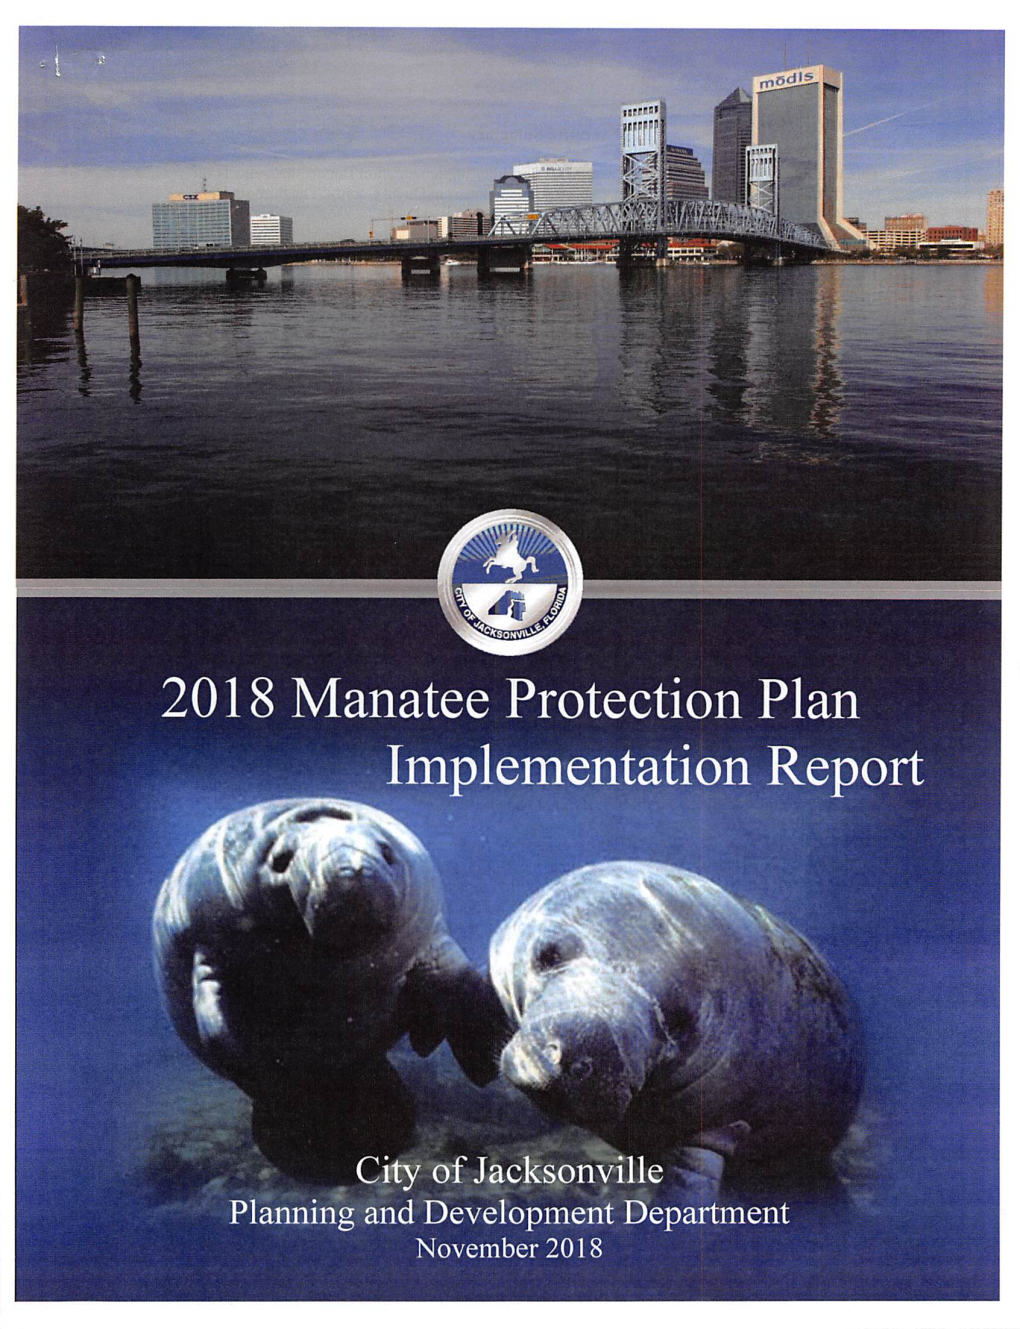 Manatee Protection Plan Implementation Report